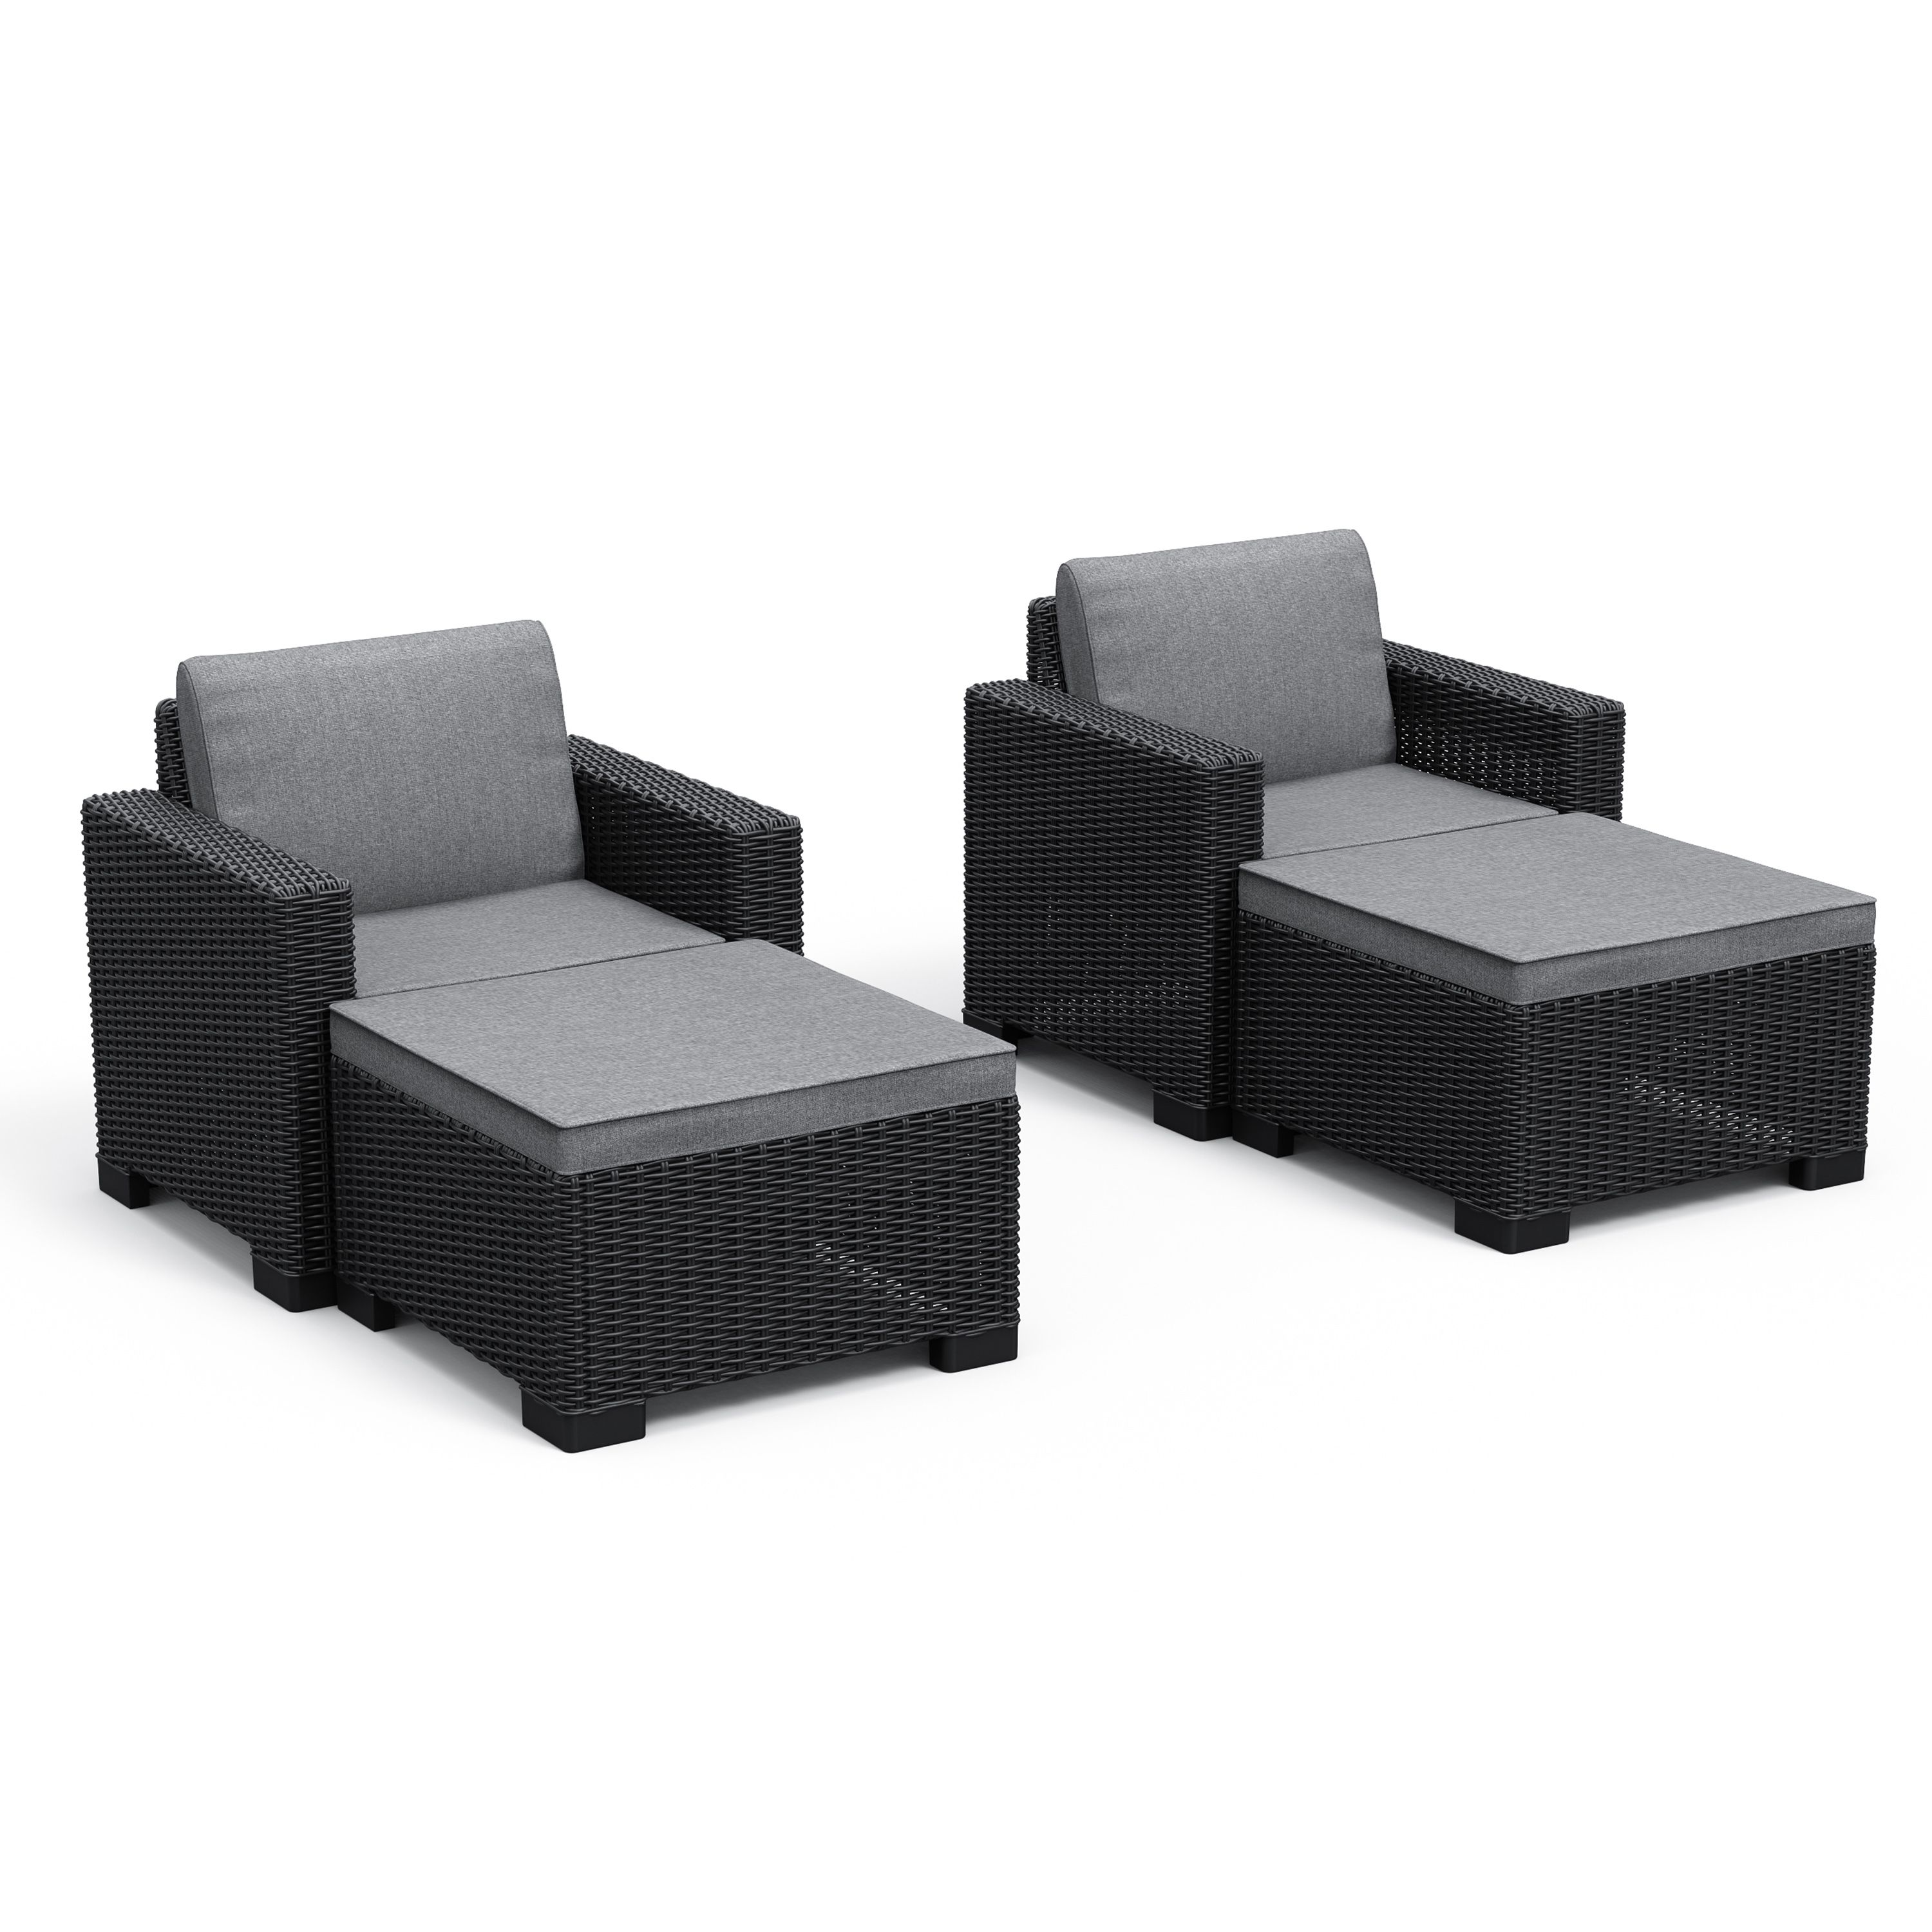 Keter California Balcony Deluxe Graphite 2 Seater Garden furniture set with Chair & Footstool